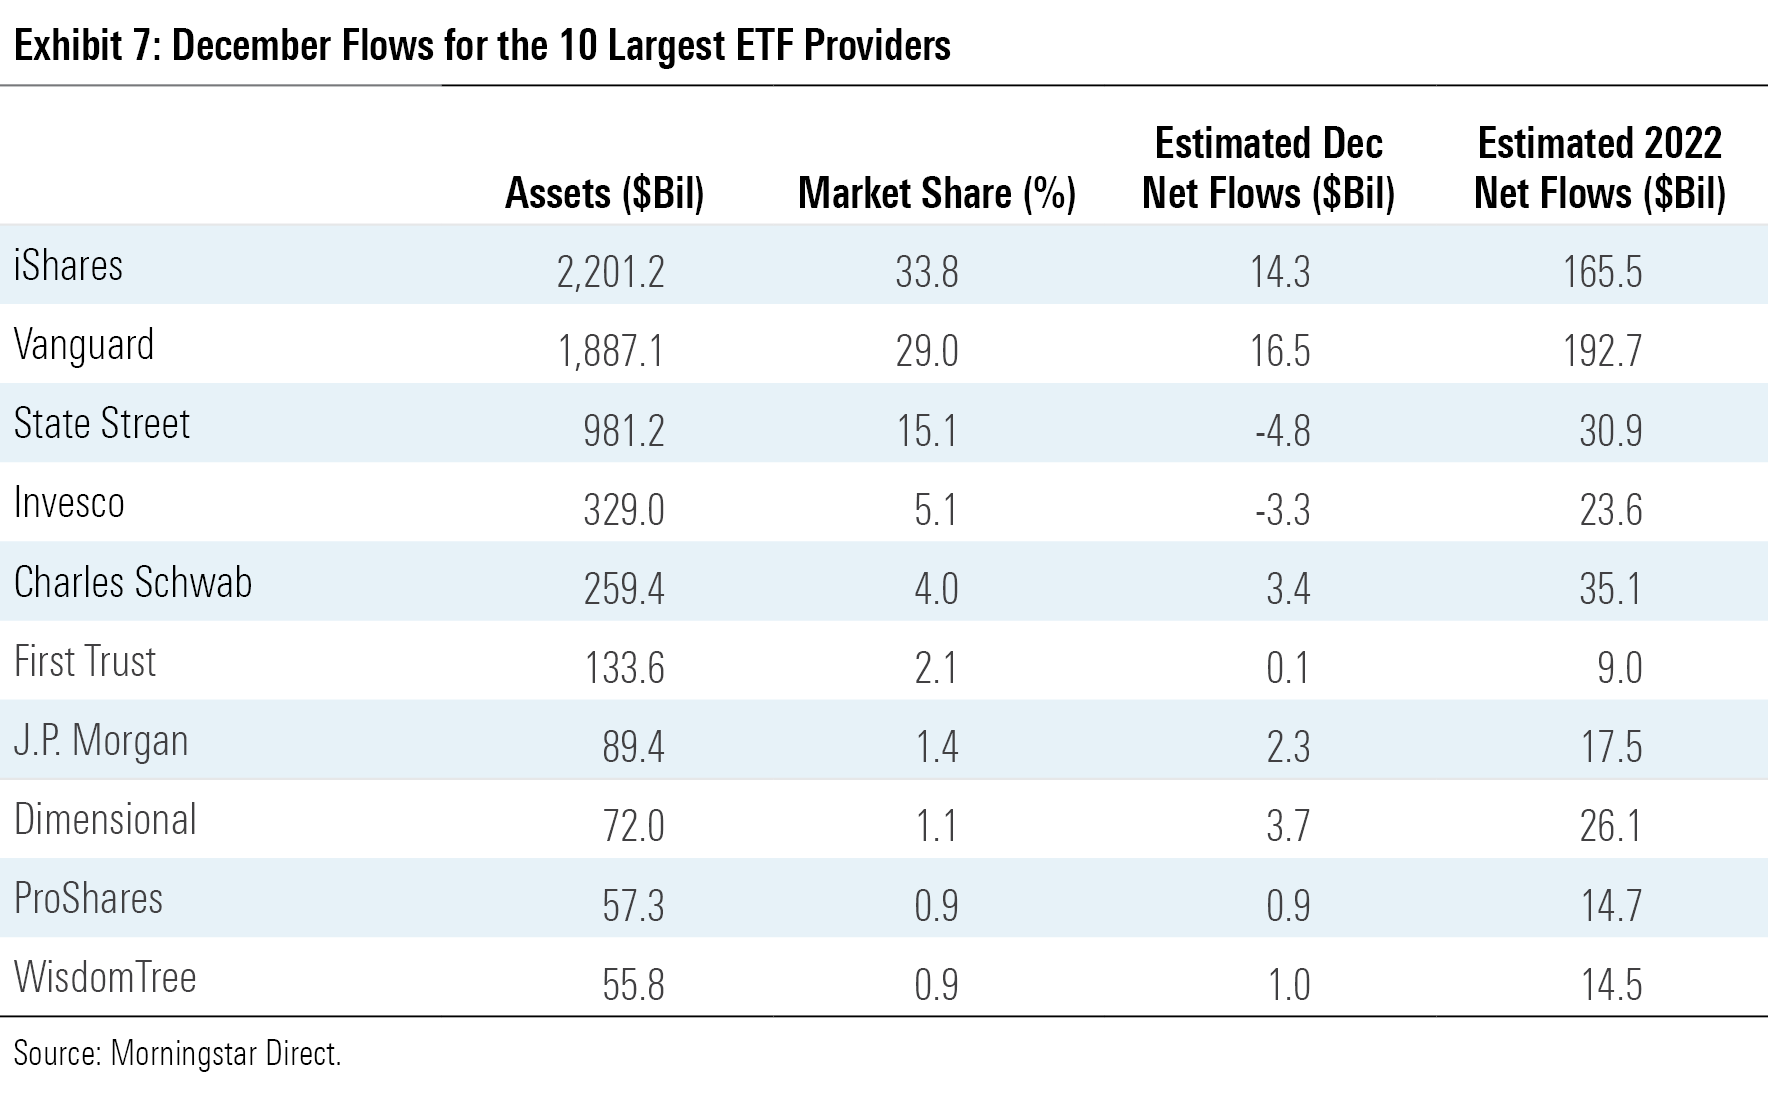 A table of the December flows for the 10 largest ETF providers.